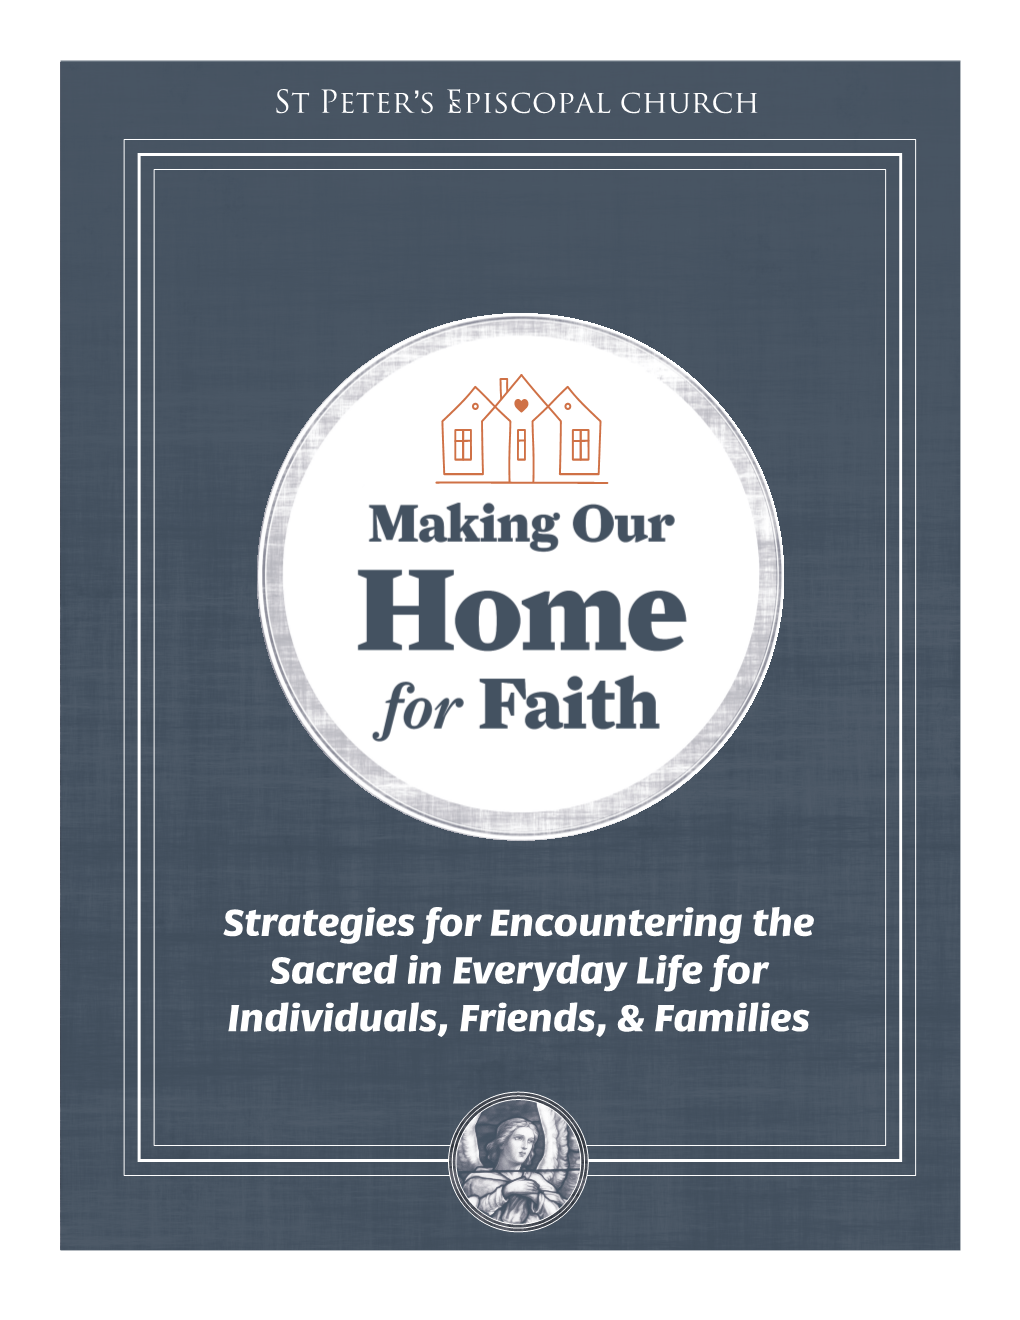 Strategies for Encountering the Sacred in Everyday Life for Individuals, Friends, & Families